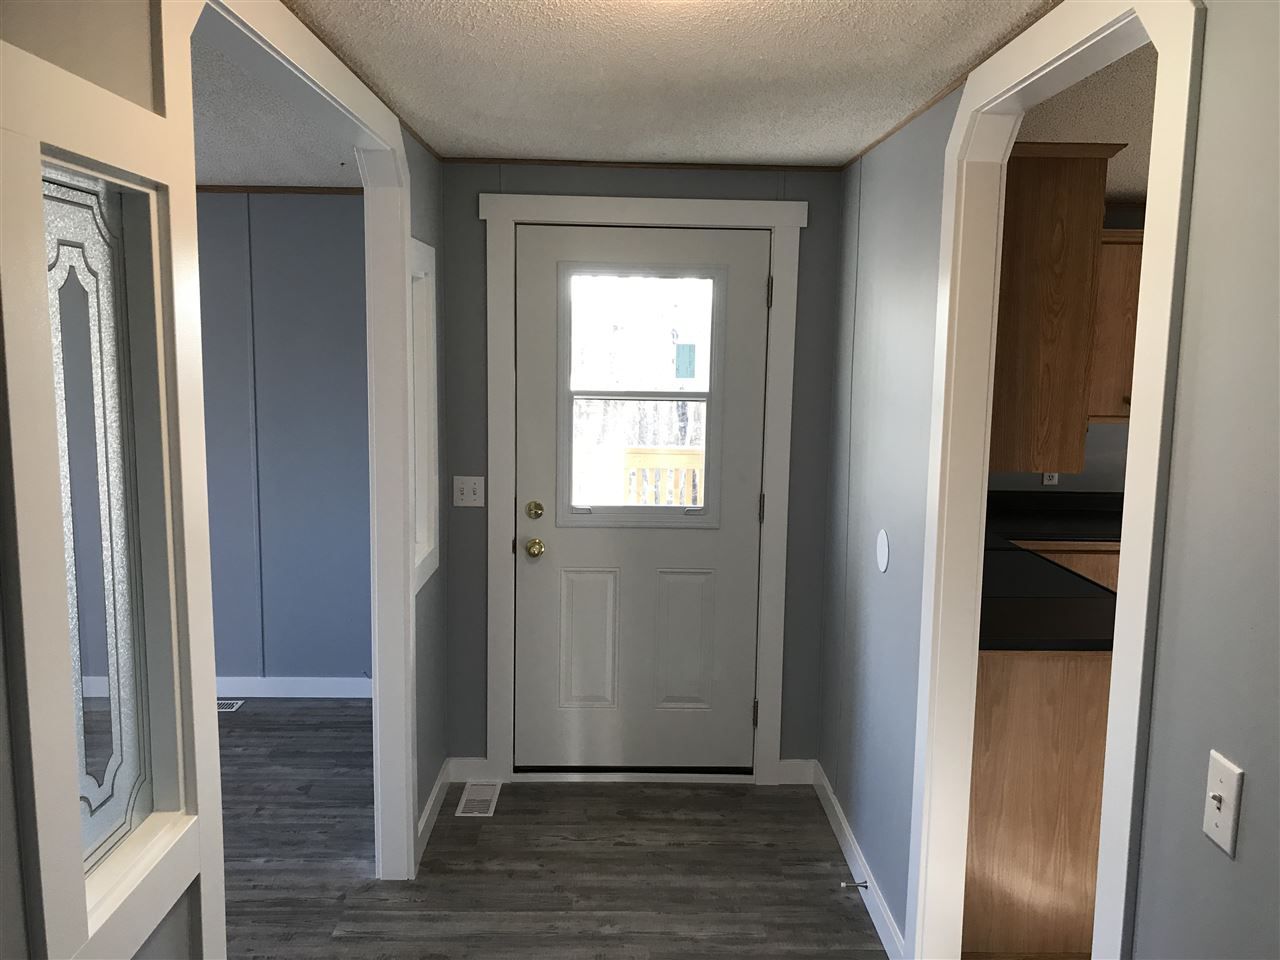 Photo 11: Photos: 5438 CECIL LAKE Road in Fort St. John: Fort St. John - Rural E 100th Manufactured Home for sale (Fort St. John (Zone 60))  : MLS®# R2353152